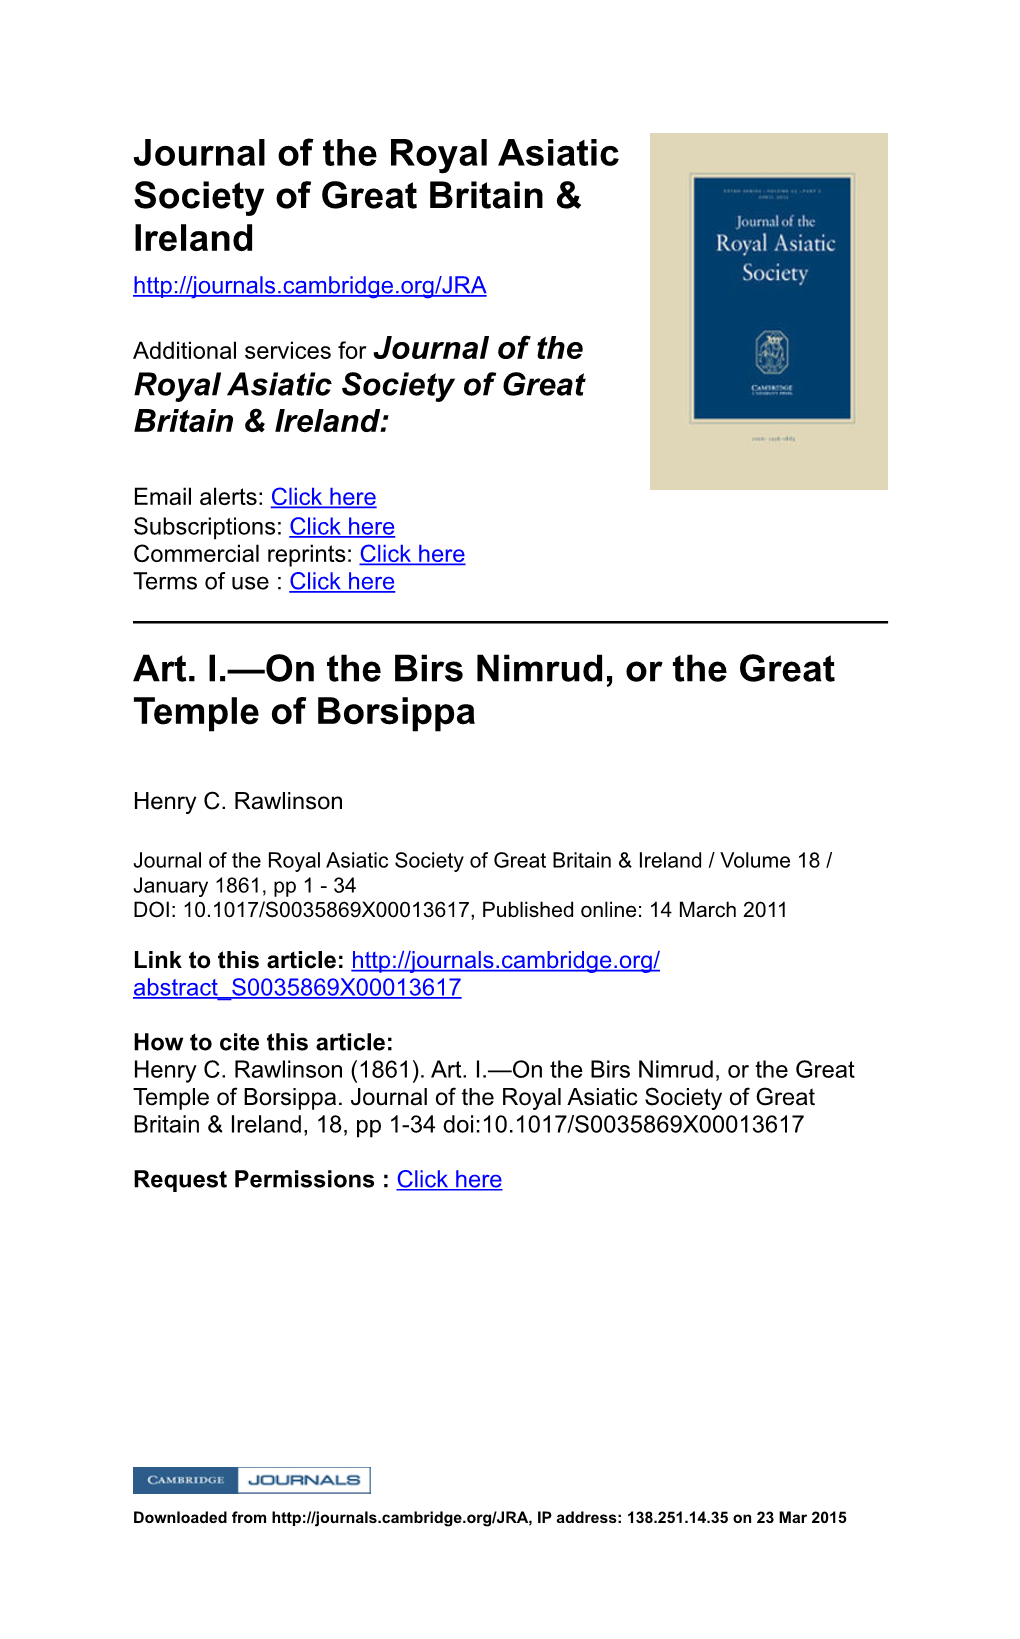 Journal of the Royal Asiatic Society of Great Britain & Ireland Art. I.—On